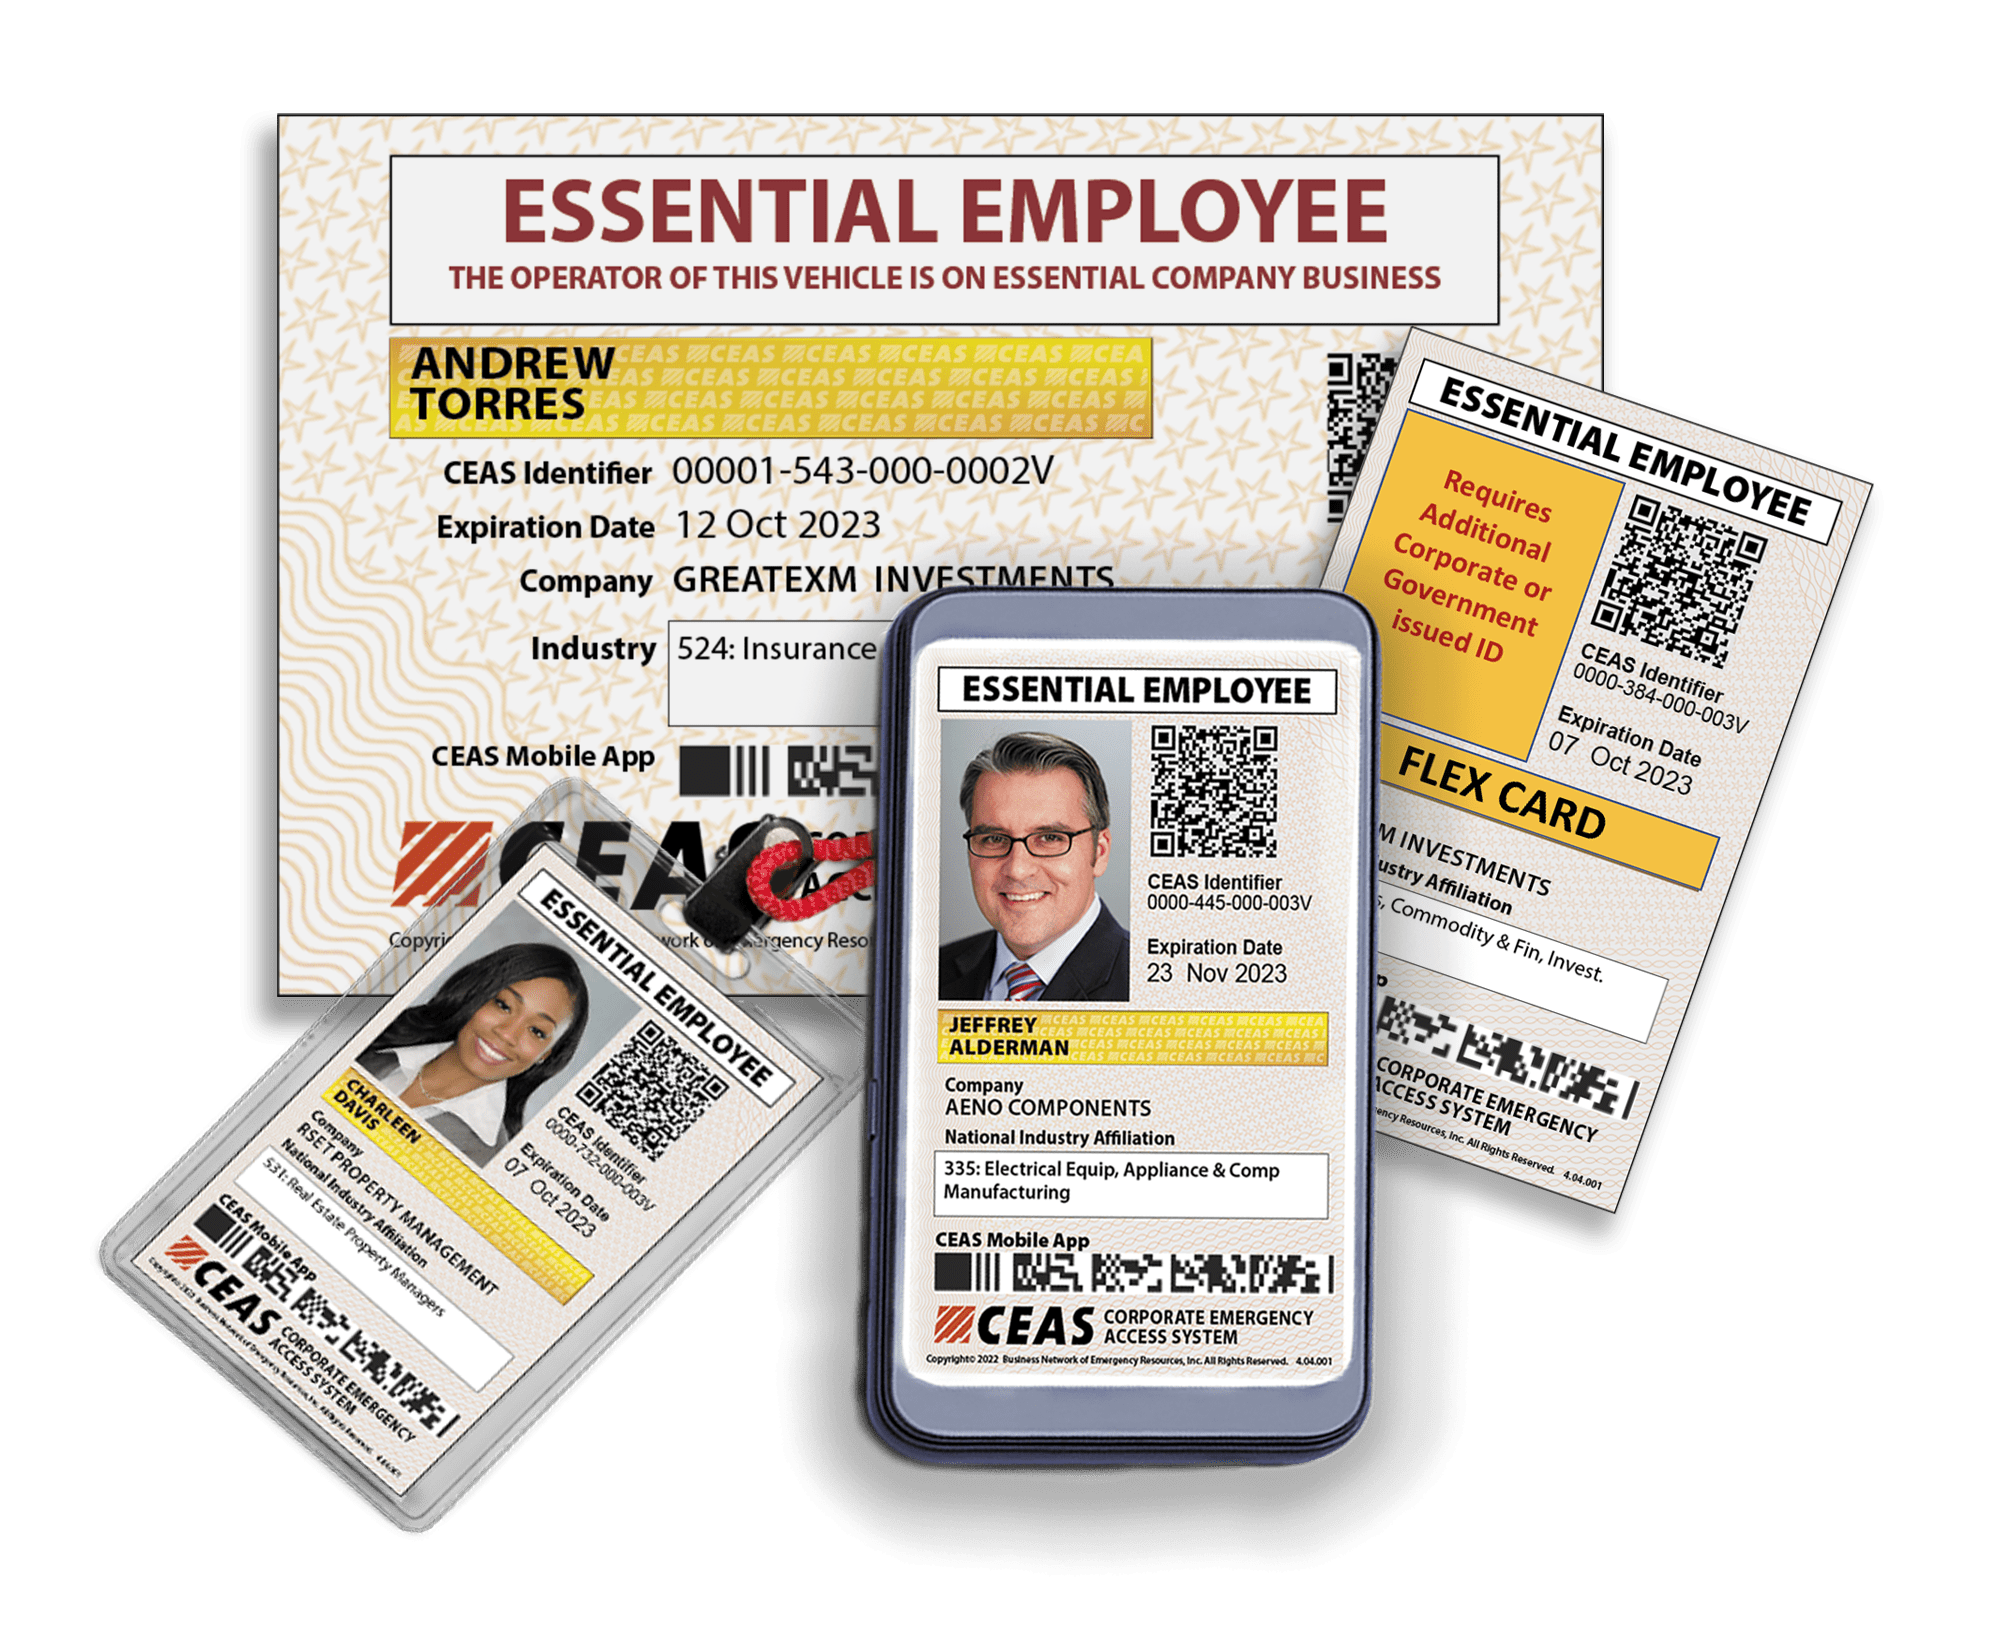 https://www.ceas.com/wp-content/uploads/2023/01/CEAS-Essential-Employee-ID-Group-2.png